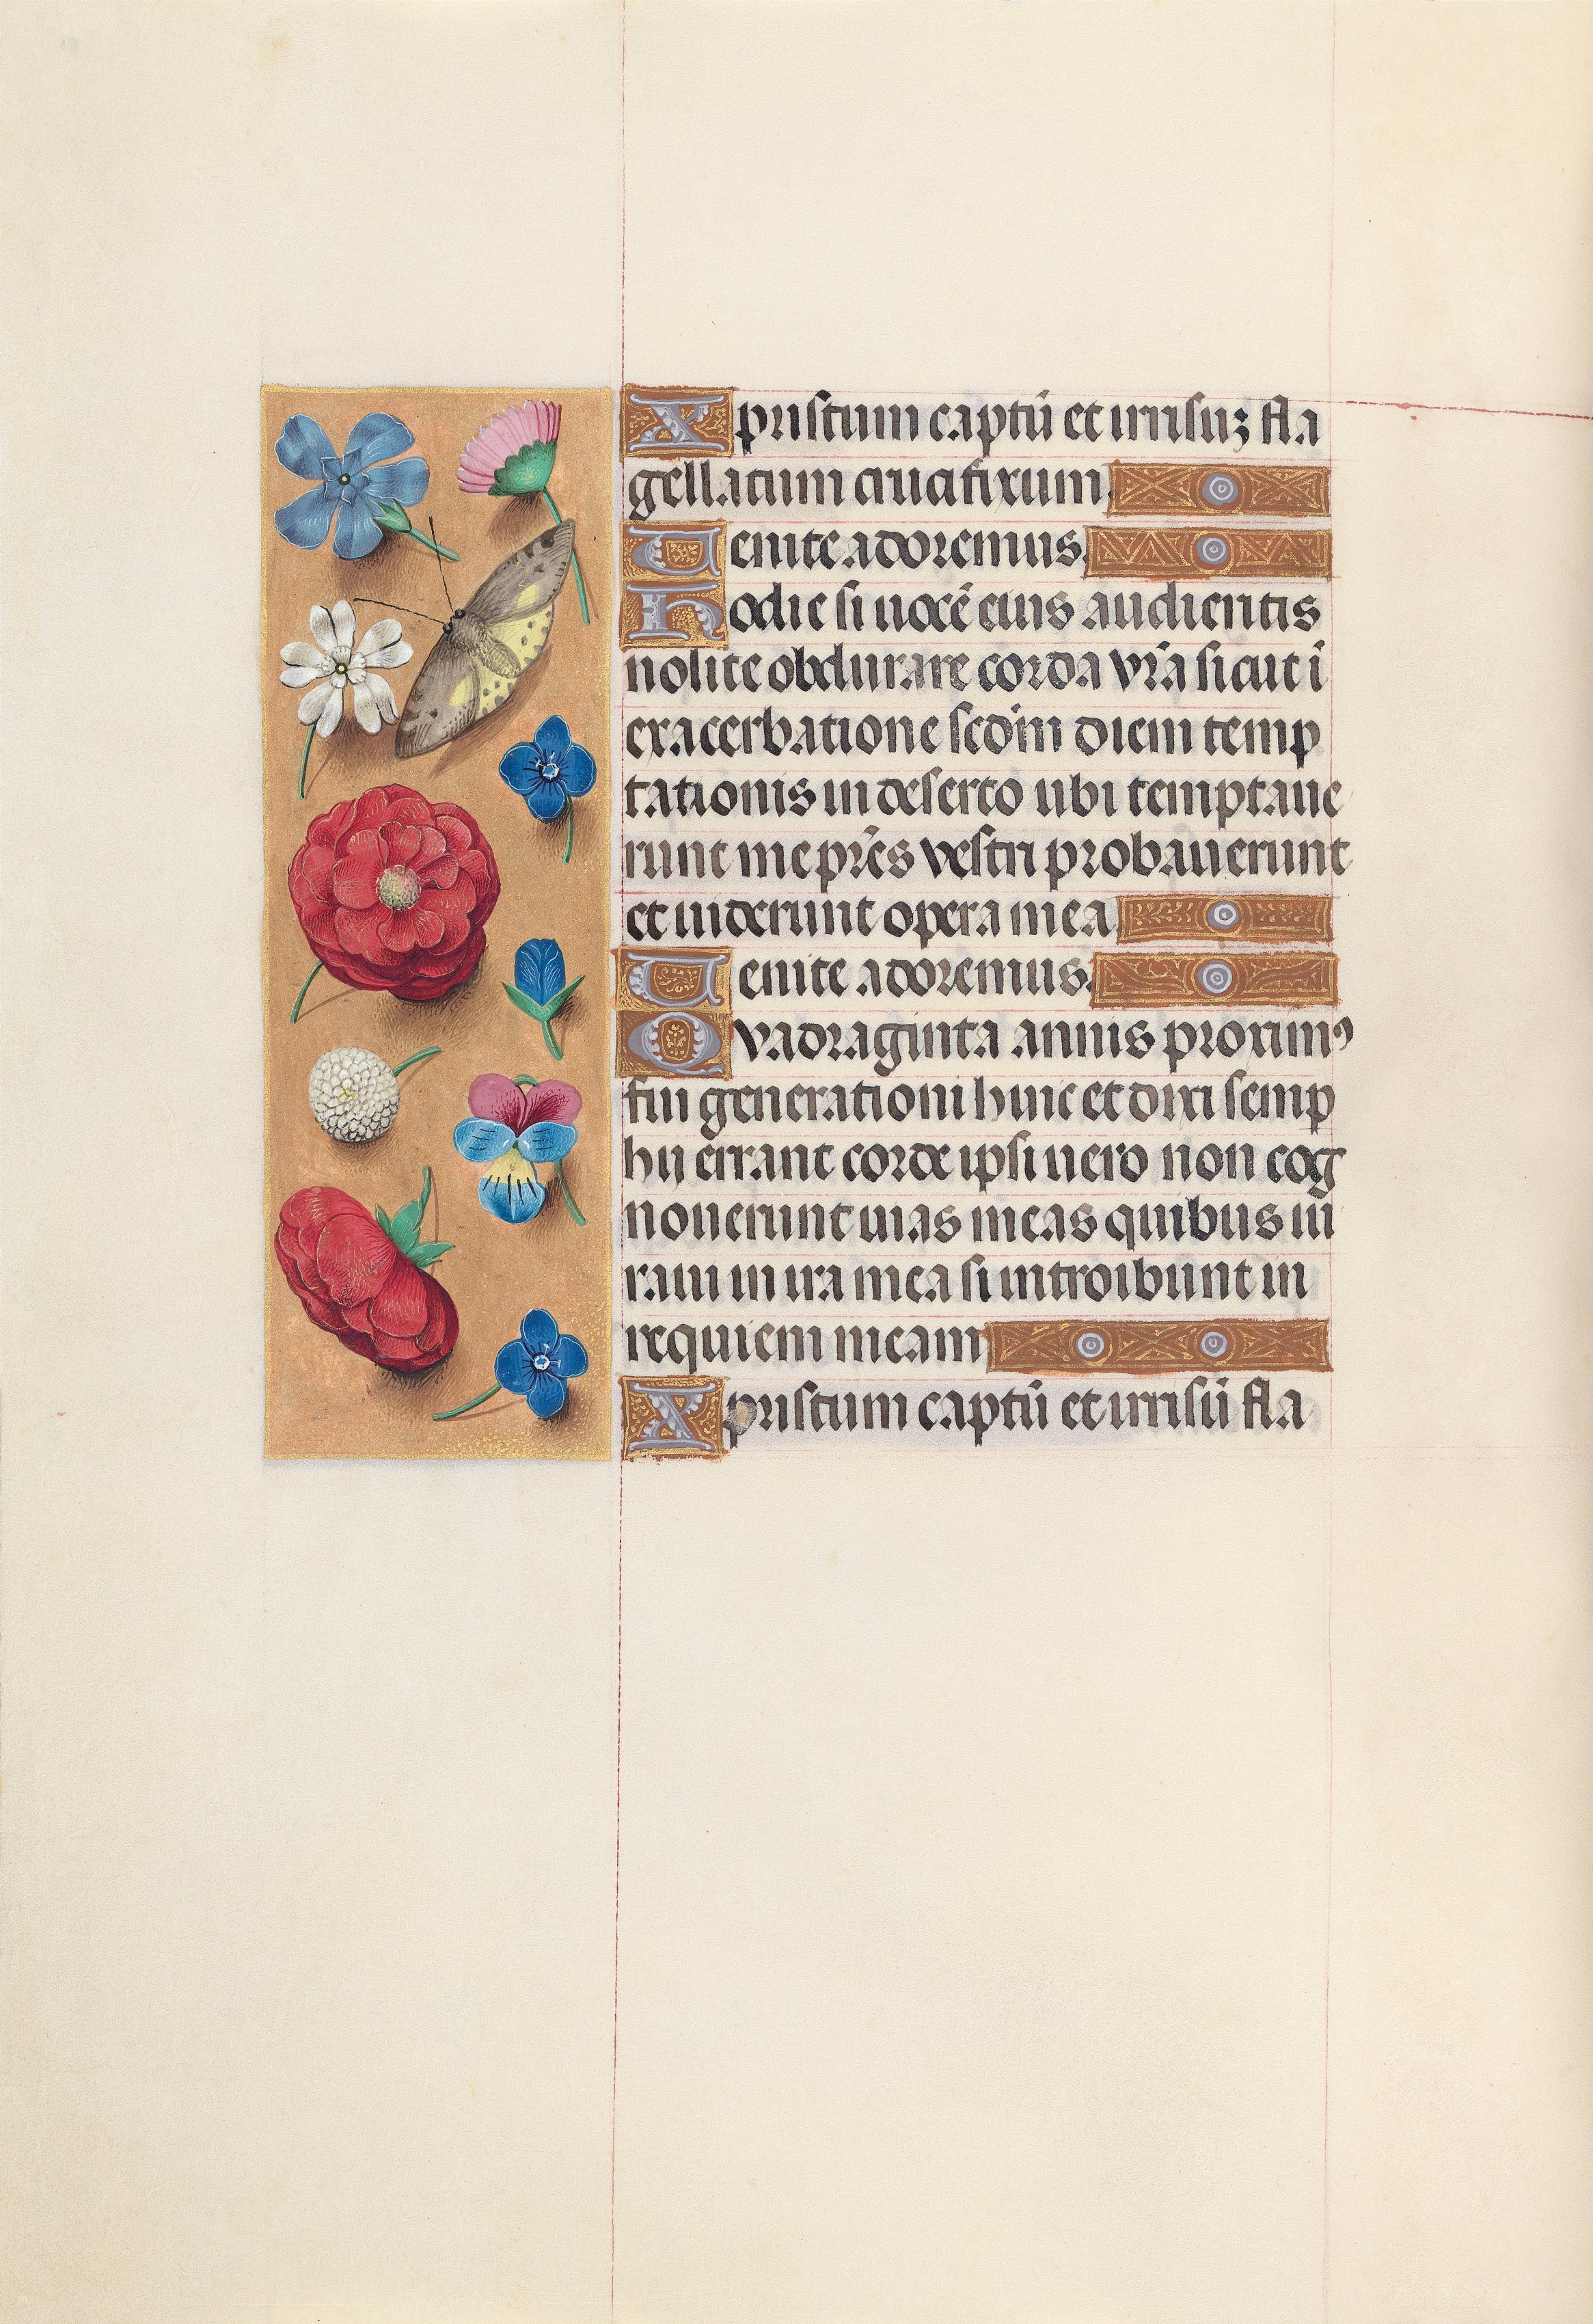 Hours of Queen Isabella the Catholic, Queen of Spain:  Fol. 51v